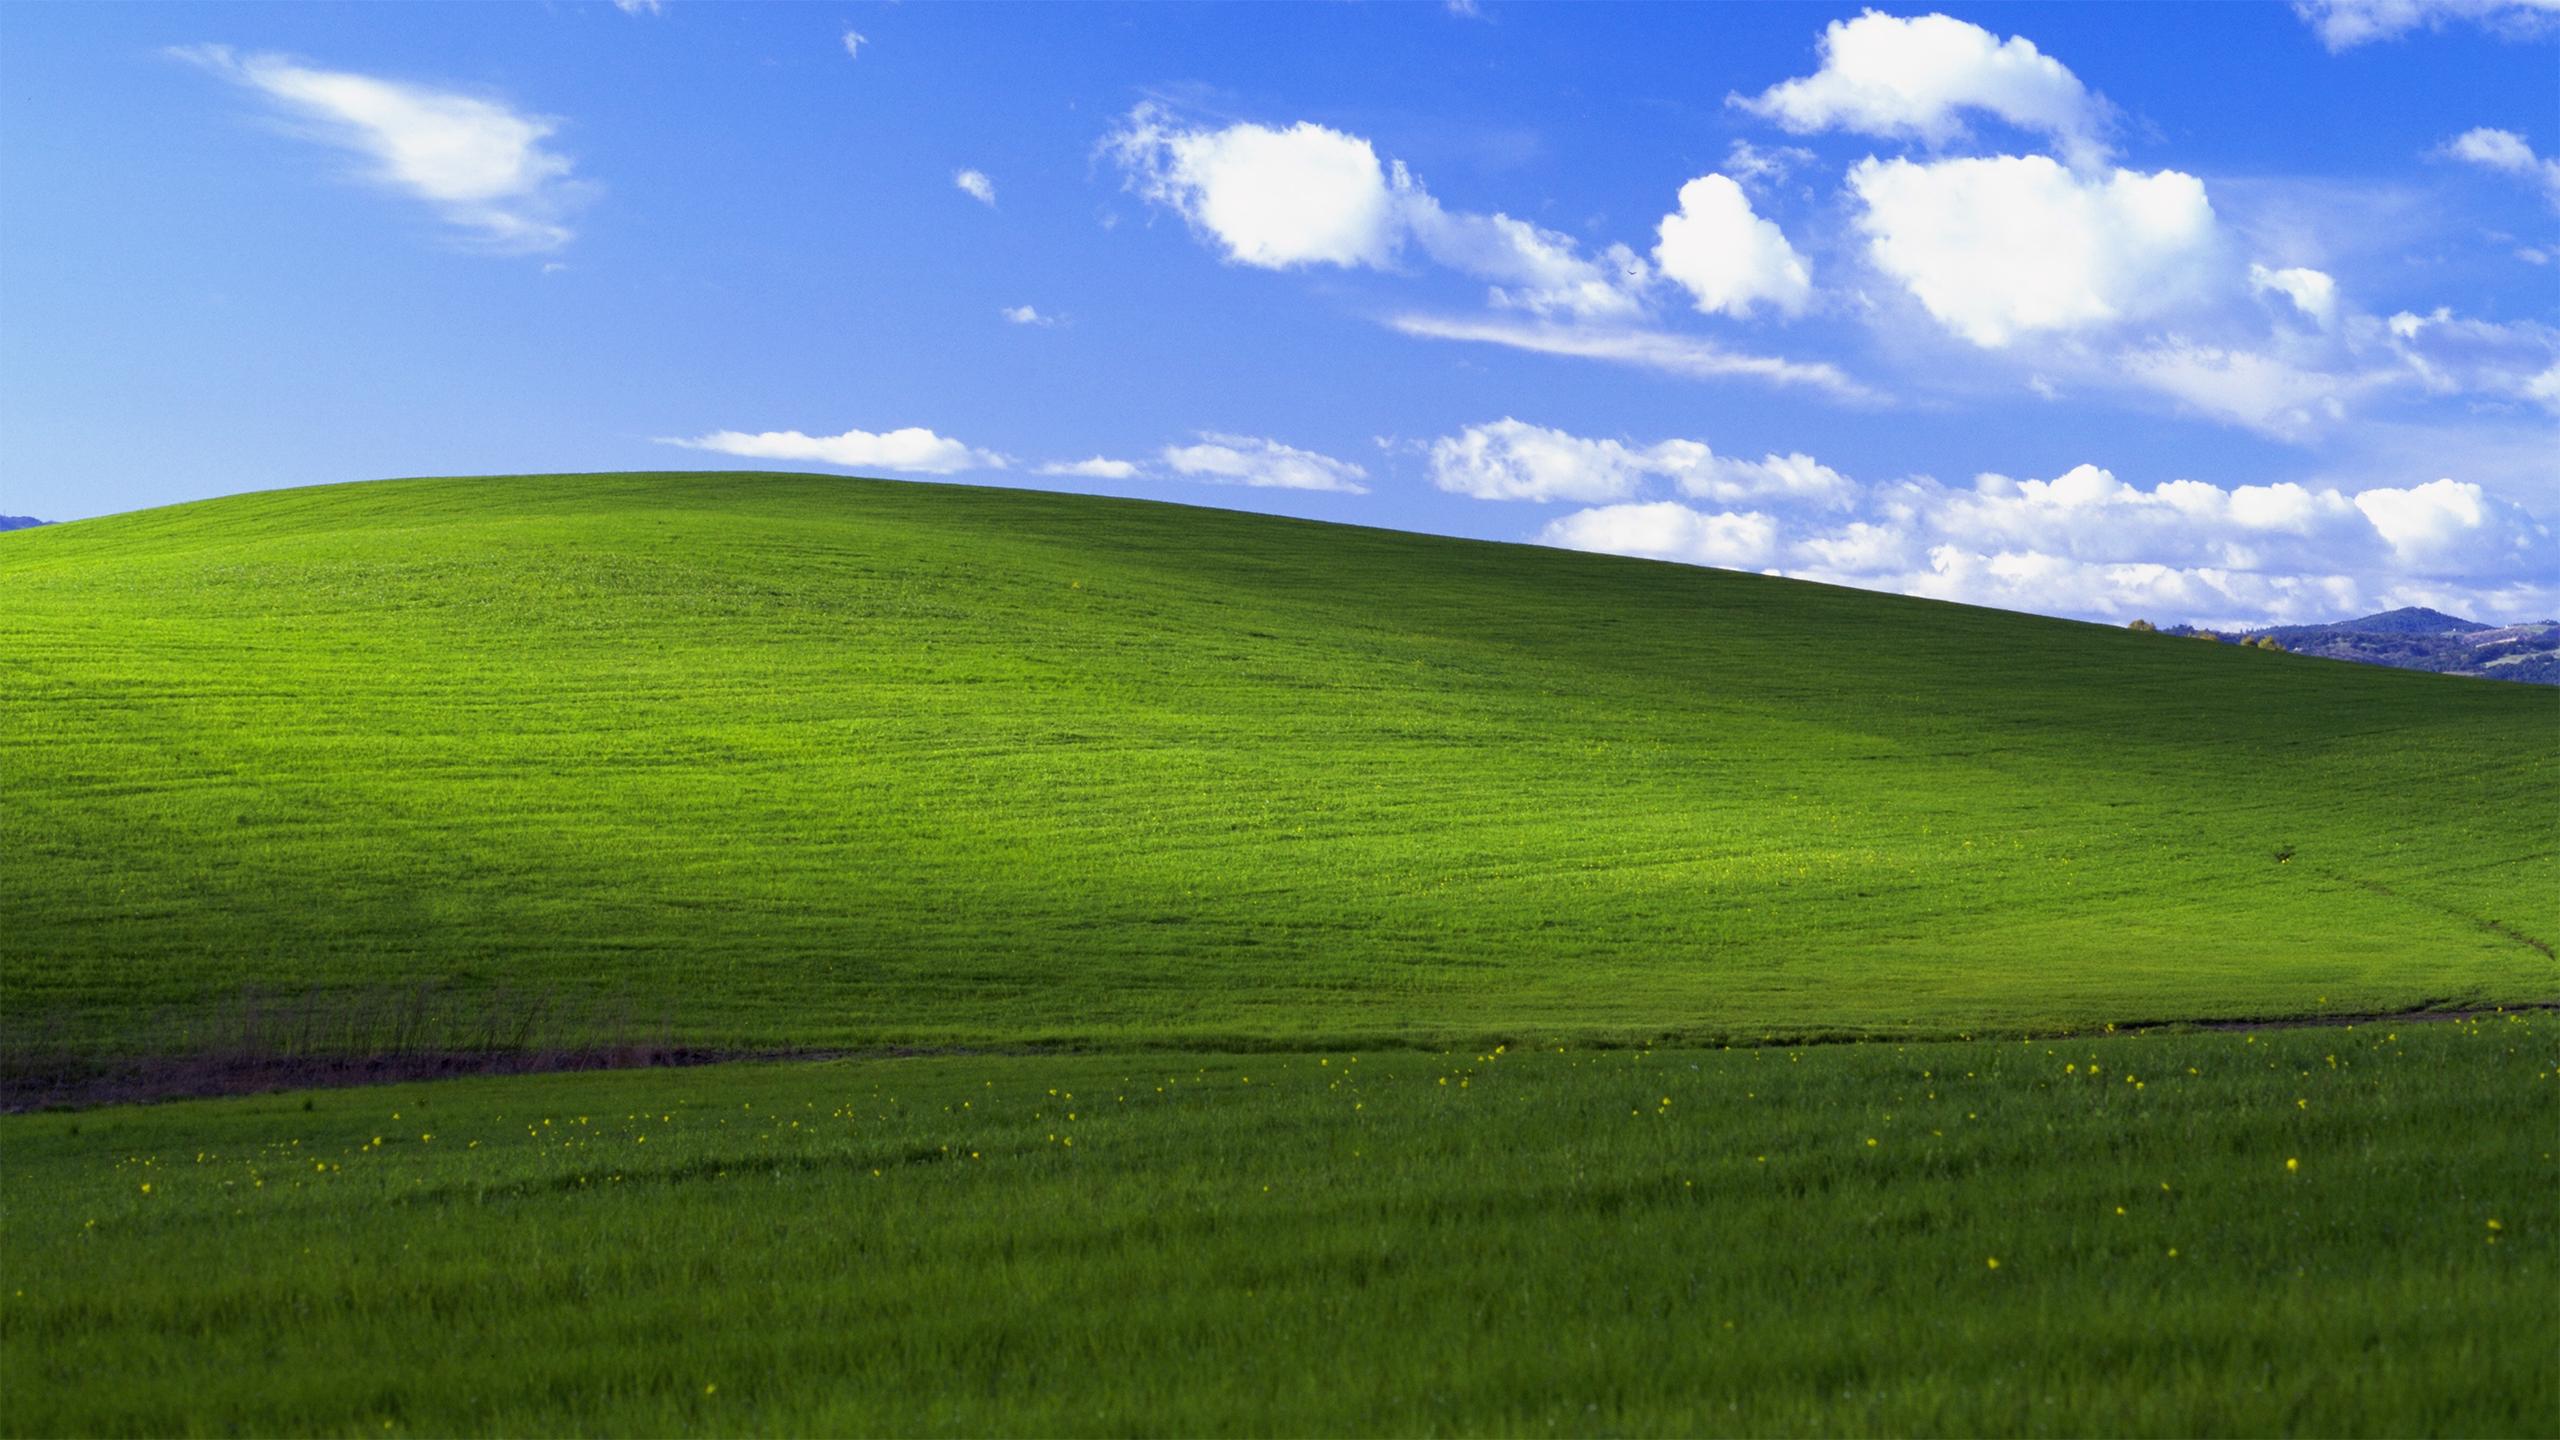 Used For The Windows Xp Default Wallpaper Is Mostly Untouched